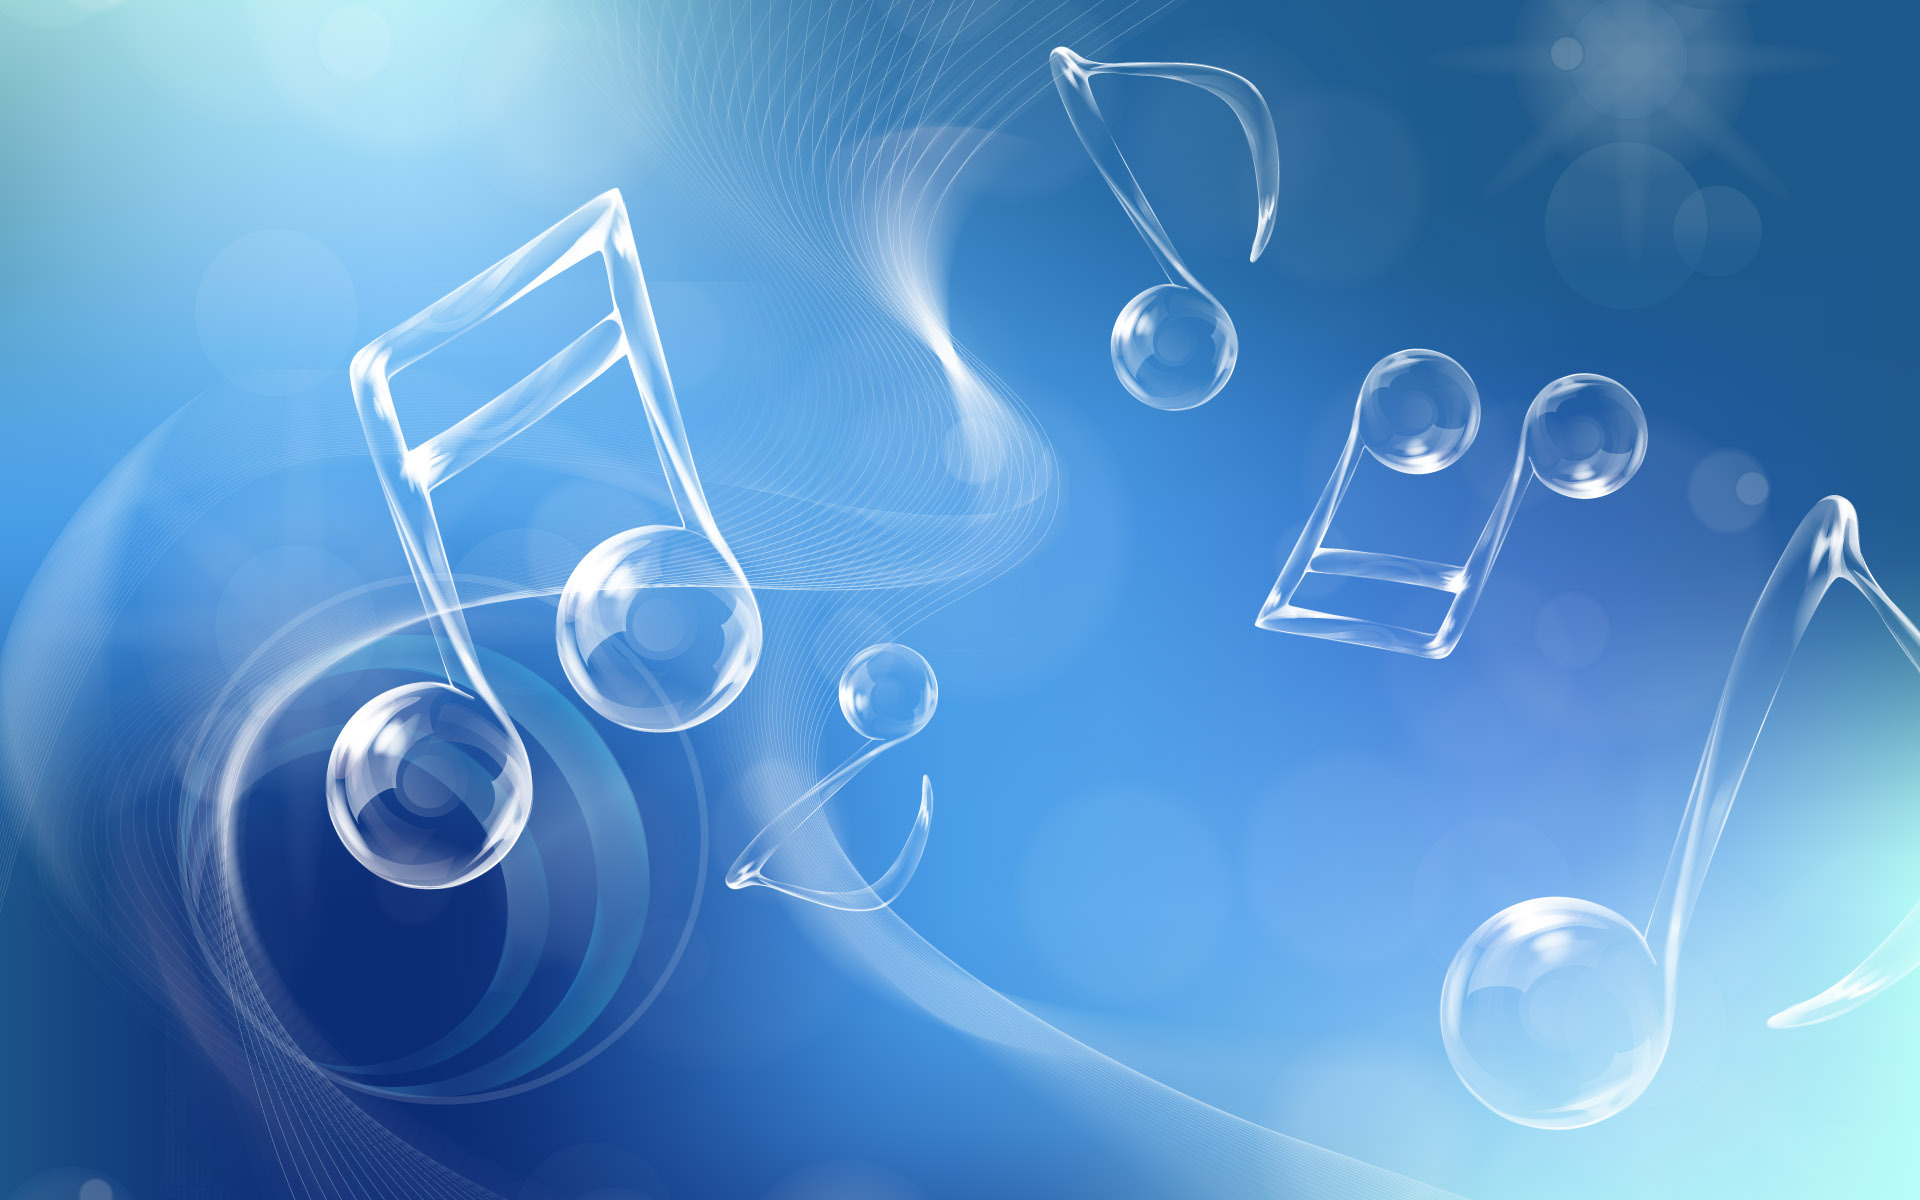 Music background images hd for mobile